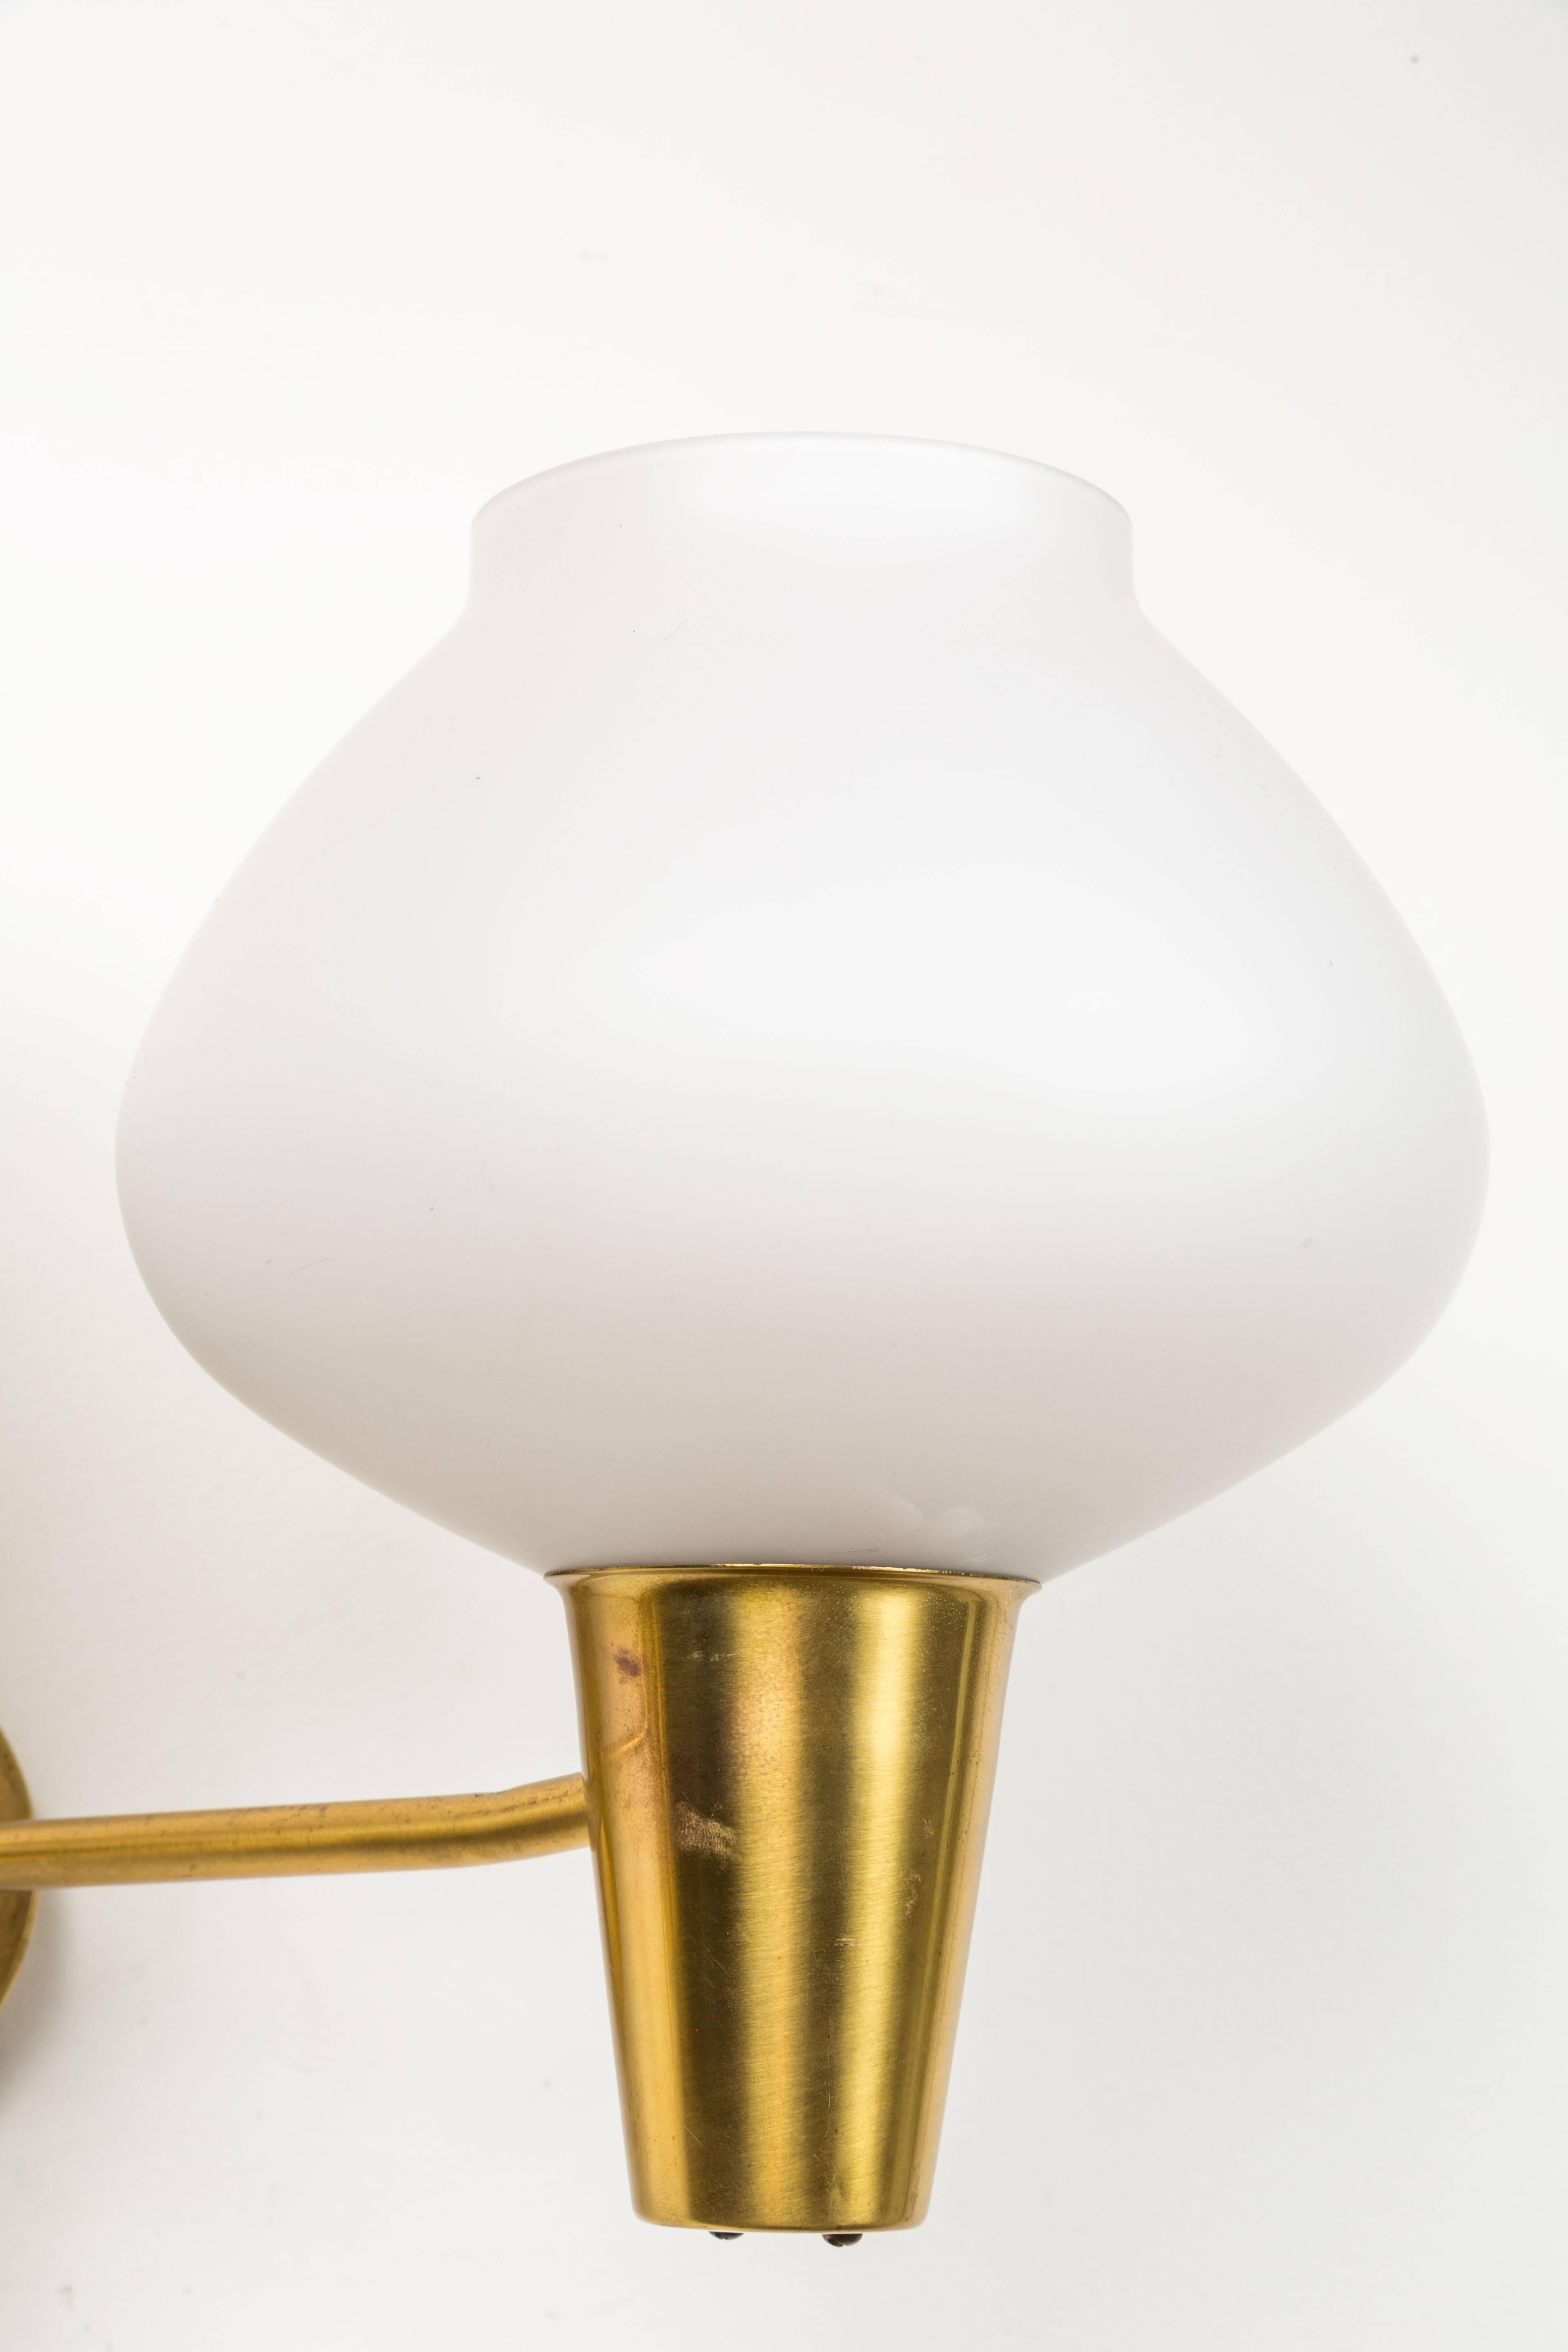 Pair of Brass and Satin Glass Sconces by ASEA 1